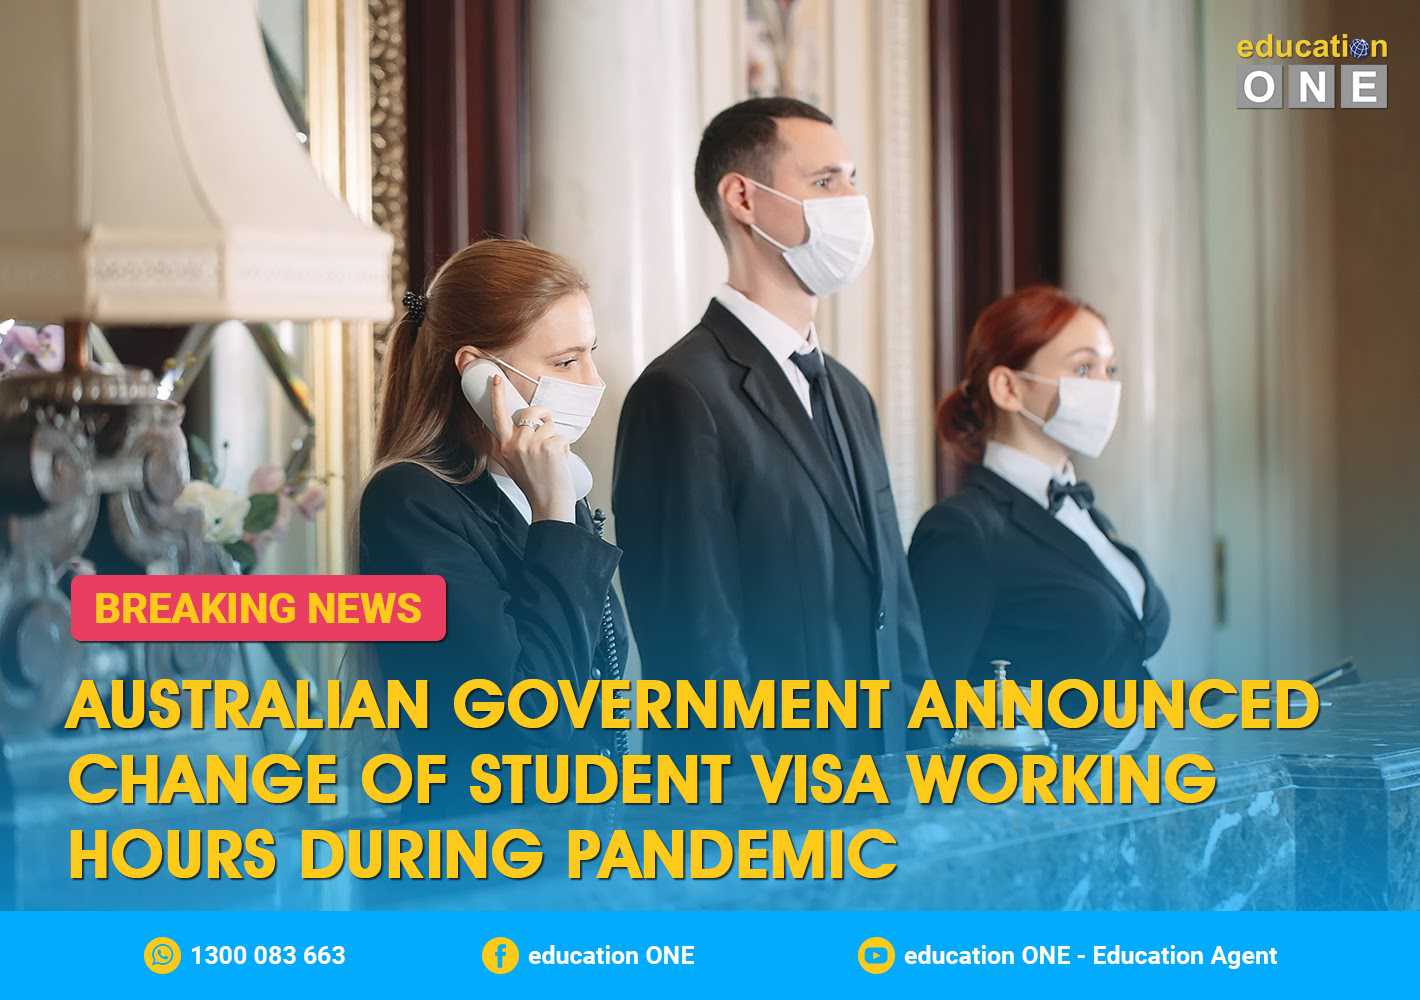 Australian Government Announced Change of Student Visa Working Hours During Pandemic